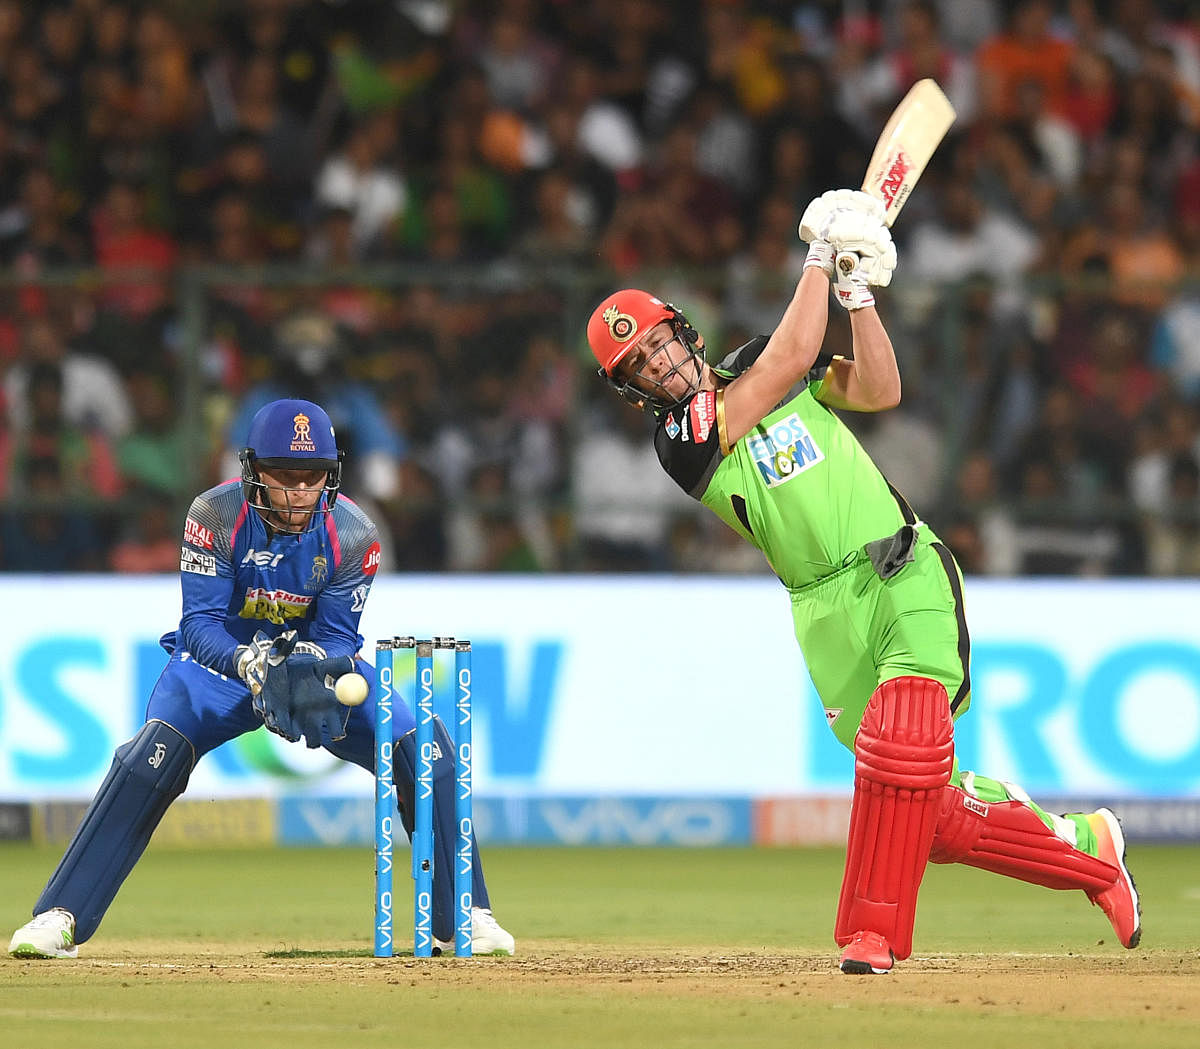 AB de Villiers is full of gratitude to Royal Challengers Bangalore fans who have stood behind the team despite team's disappointing shows. DH Photo